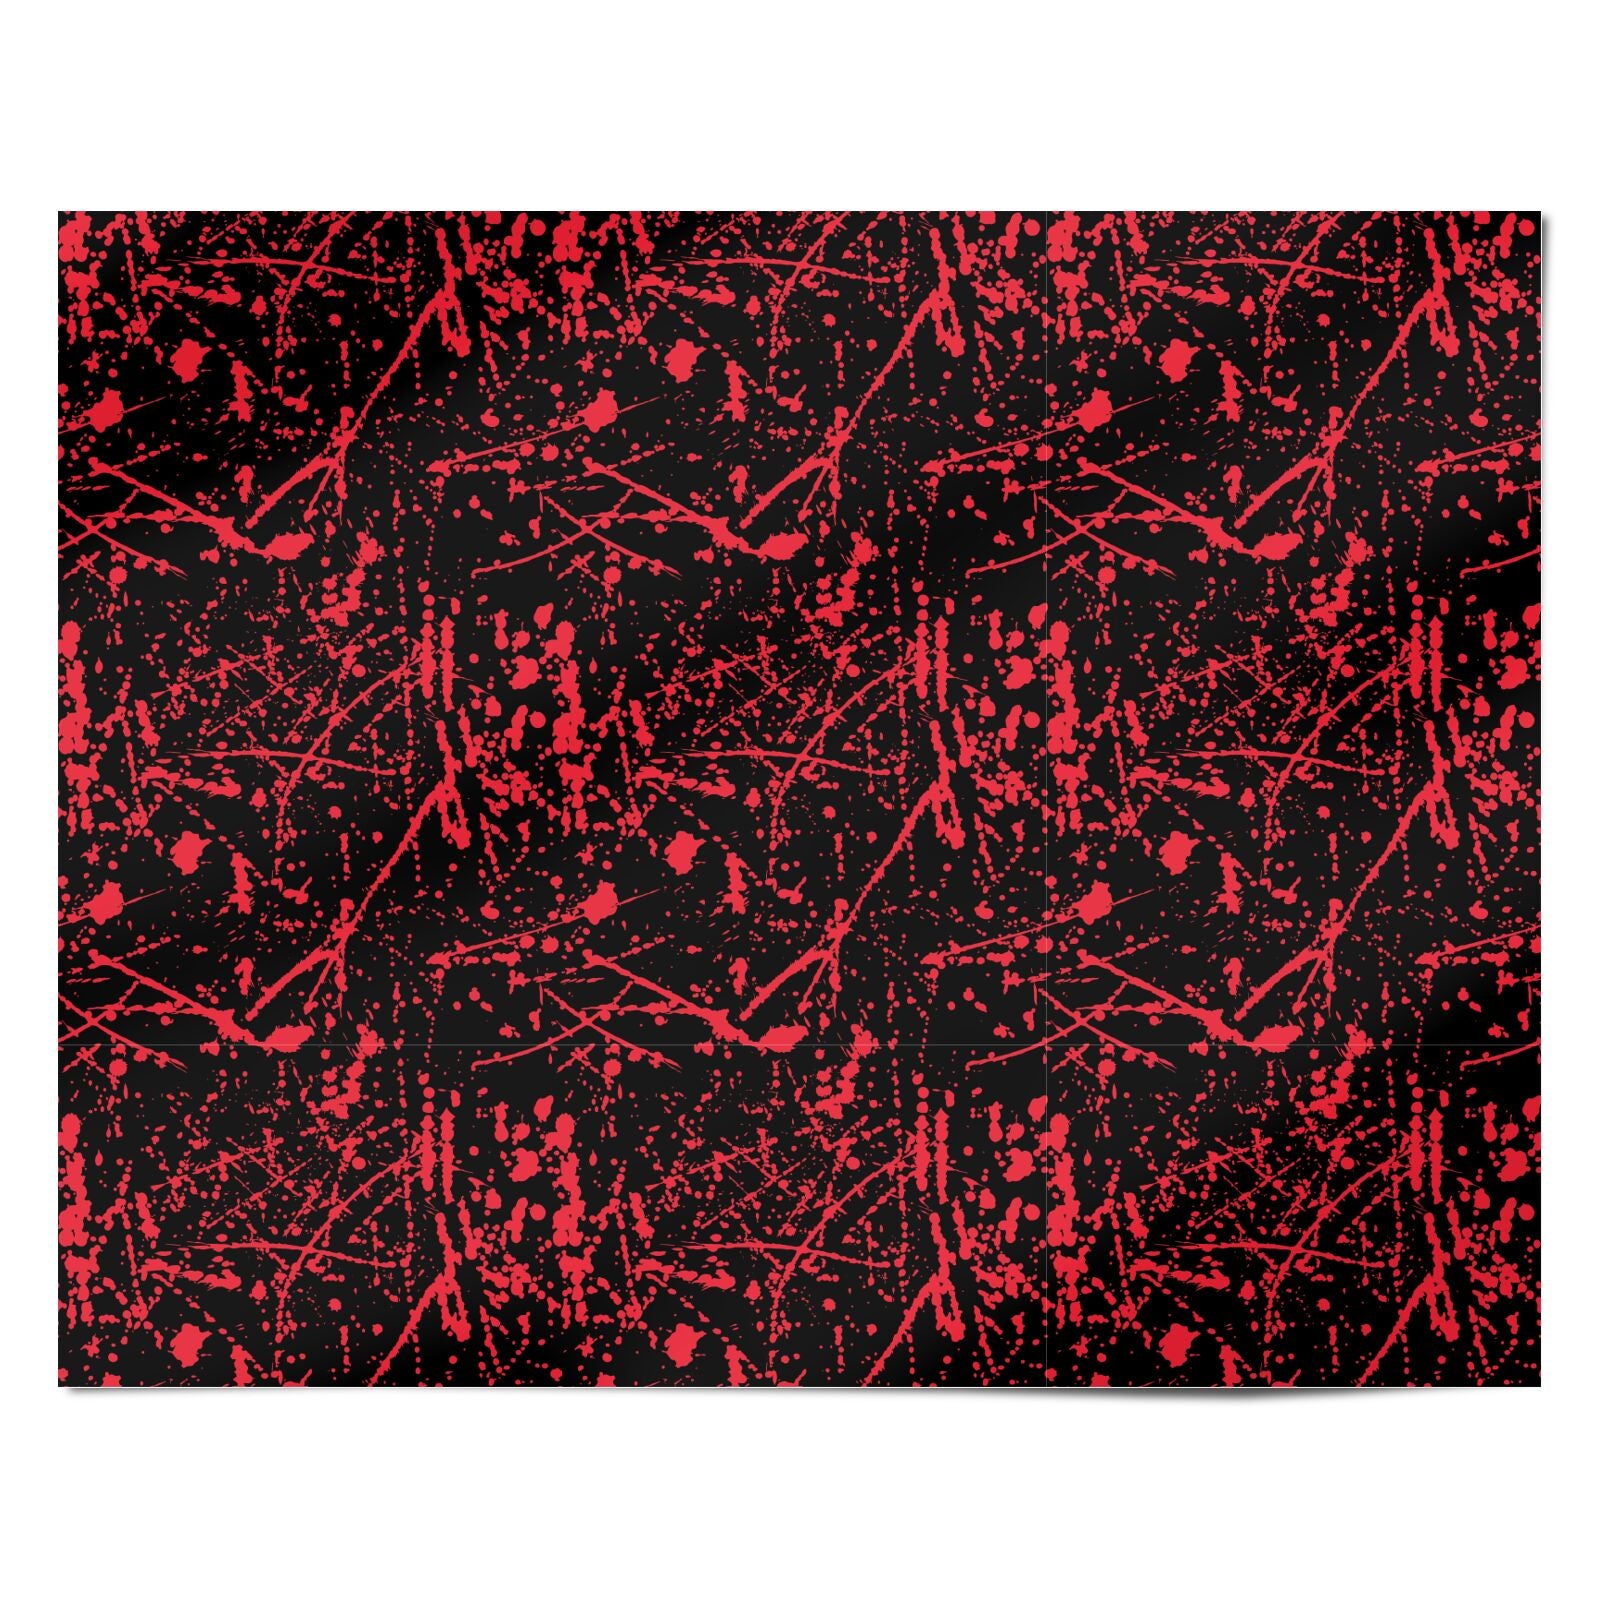 Blood Splatters Personalised Wrapping Paper Alternative